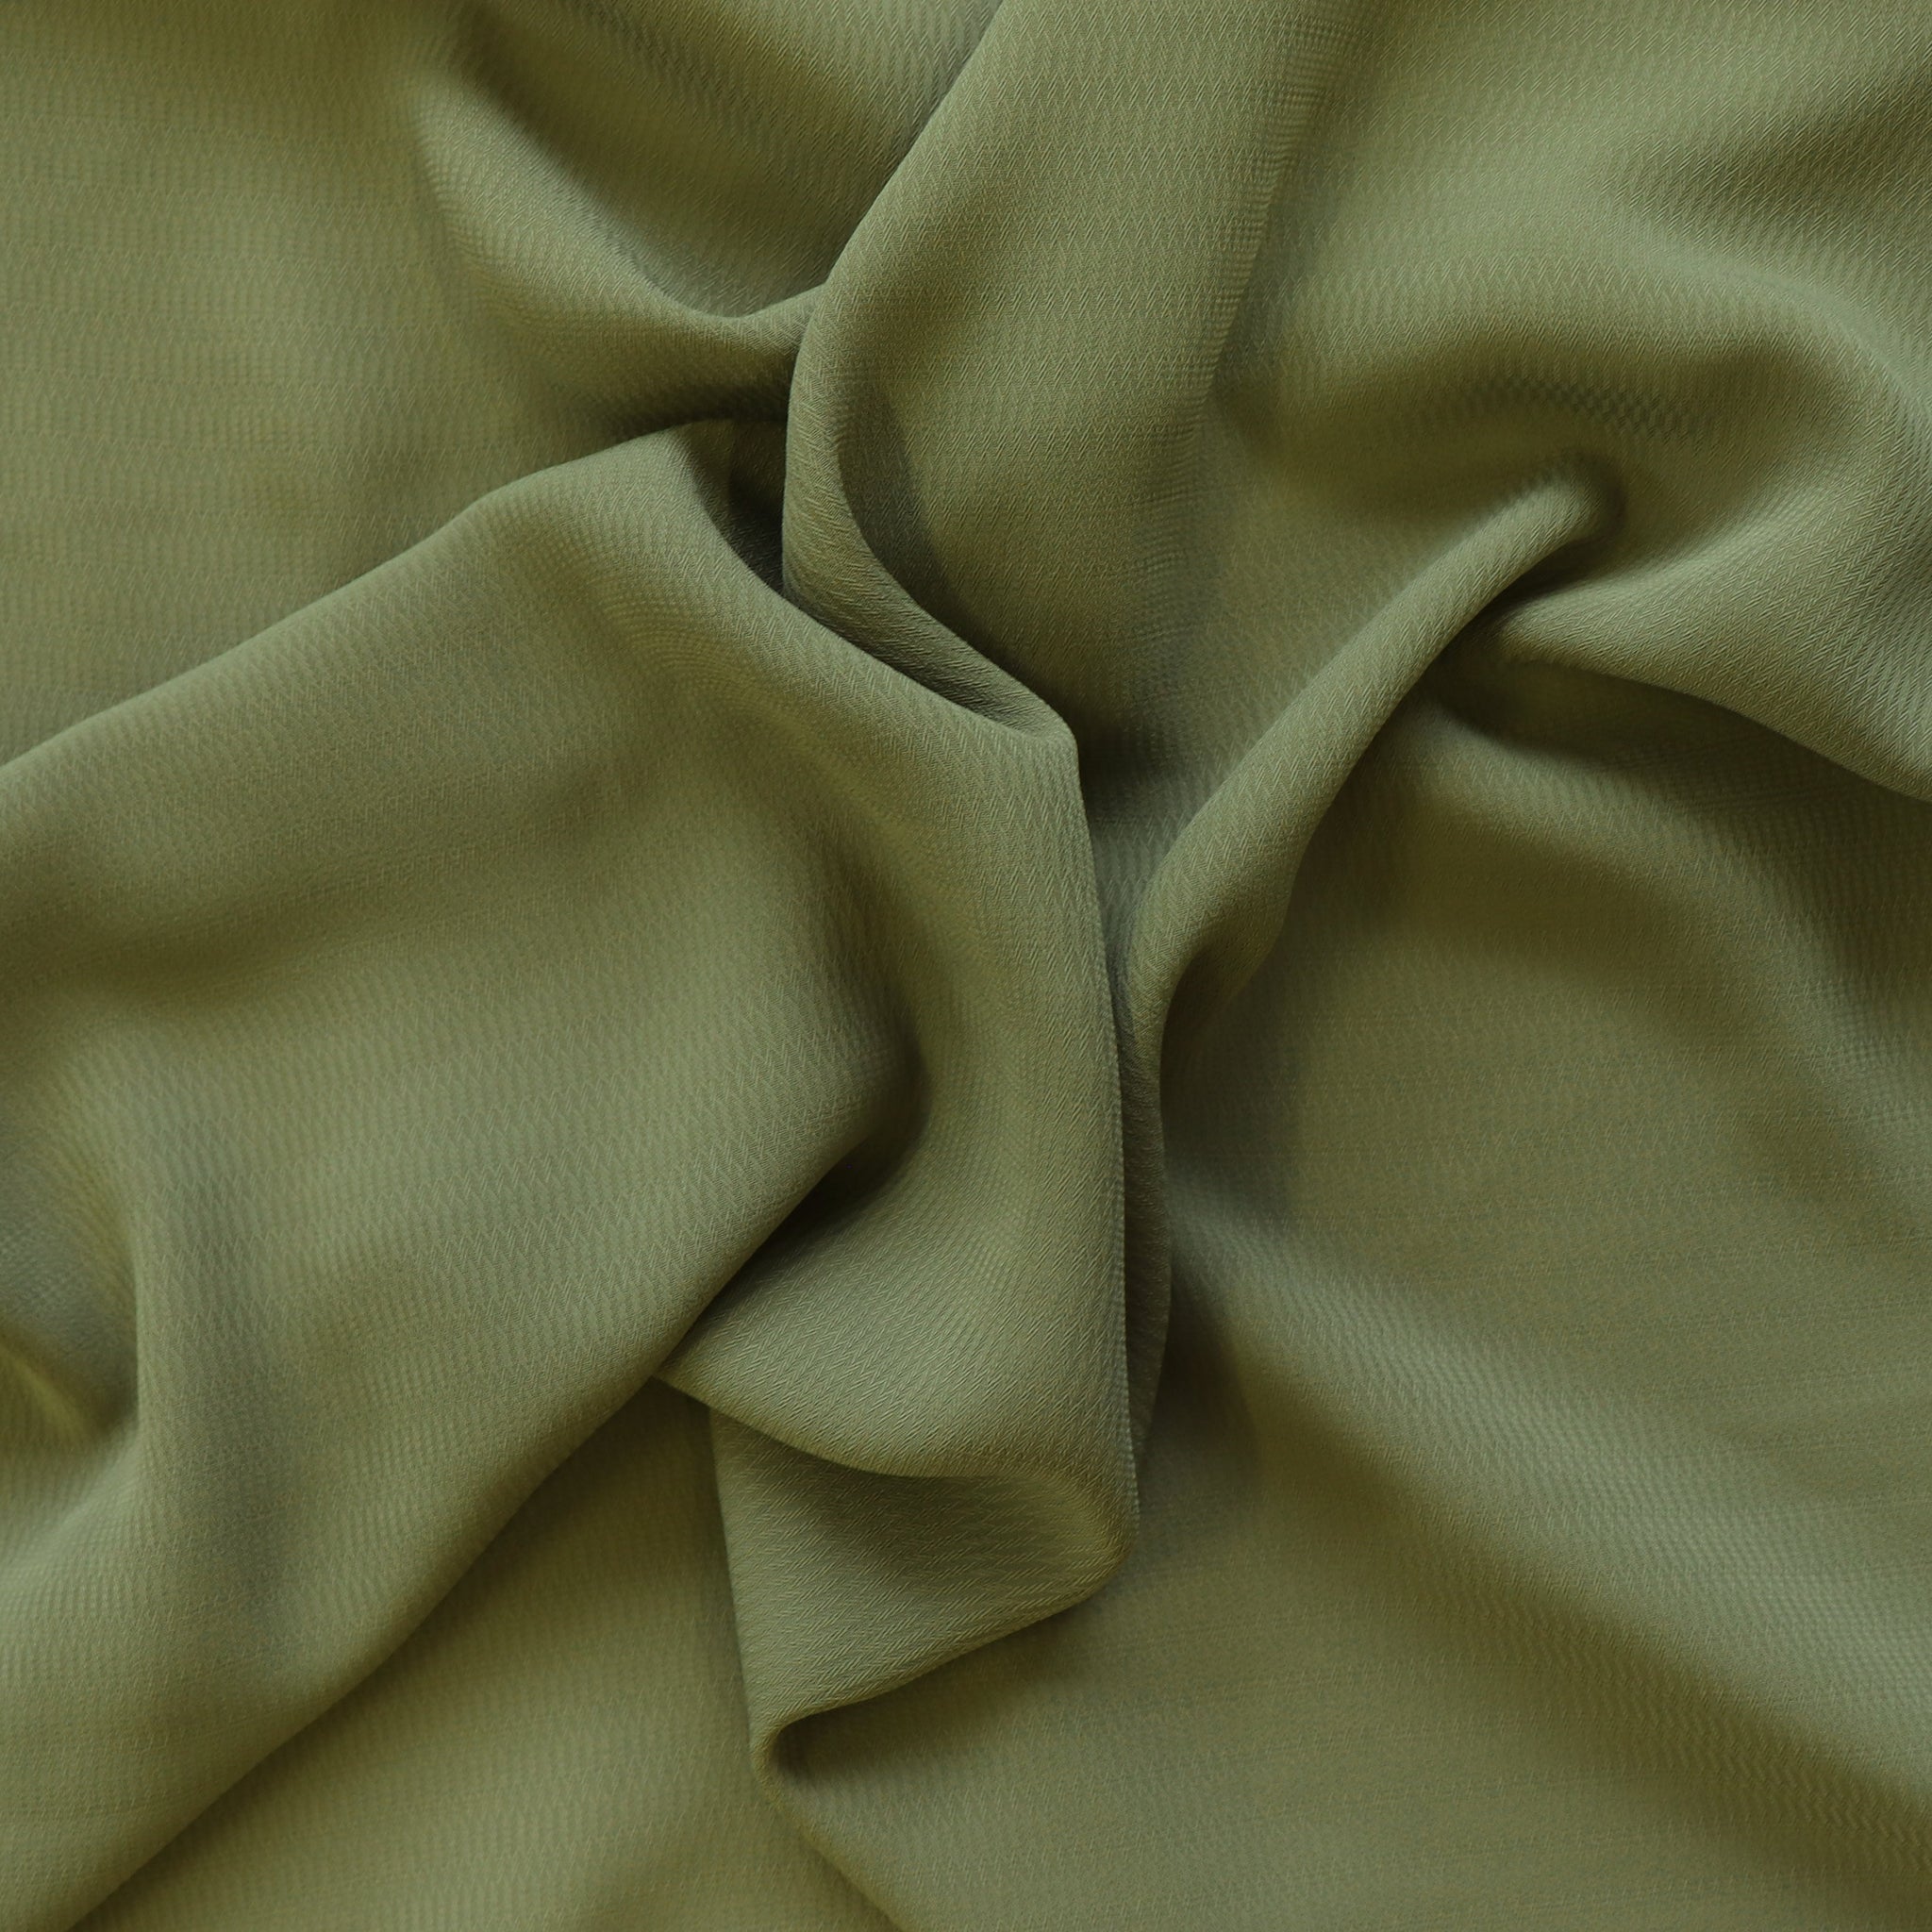 Deadstock Recycled Polyester Crepe - Khaki Green - END OF BOLT 115cm